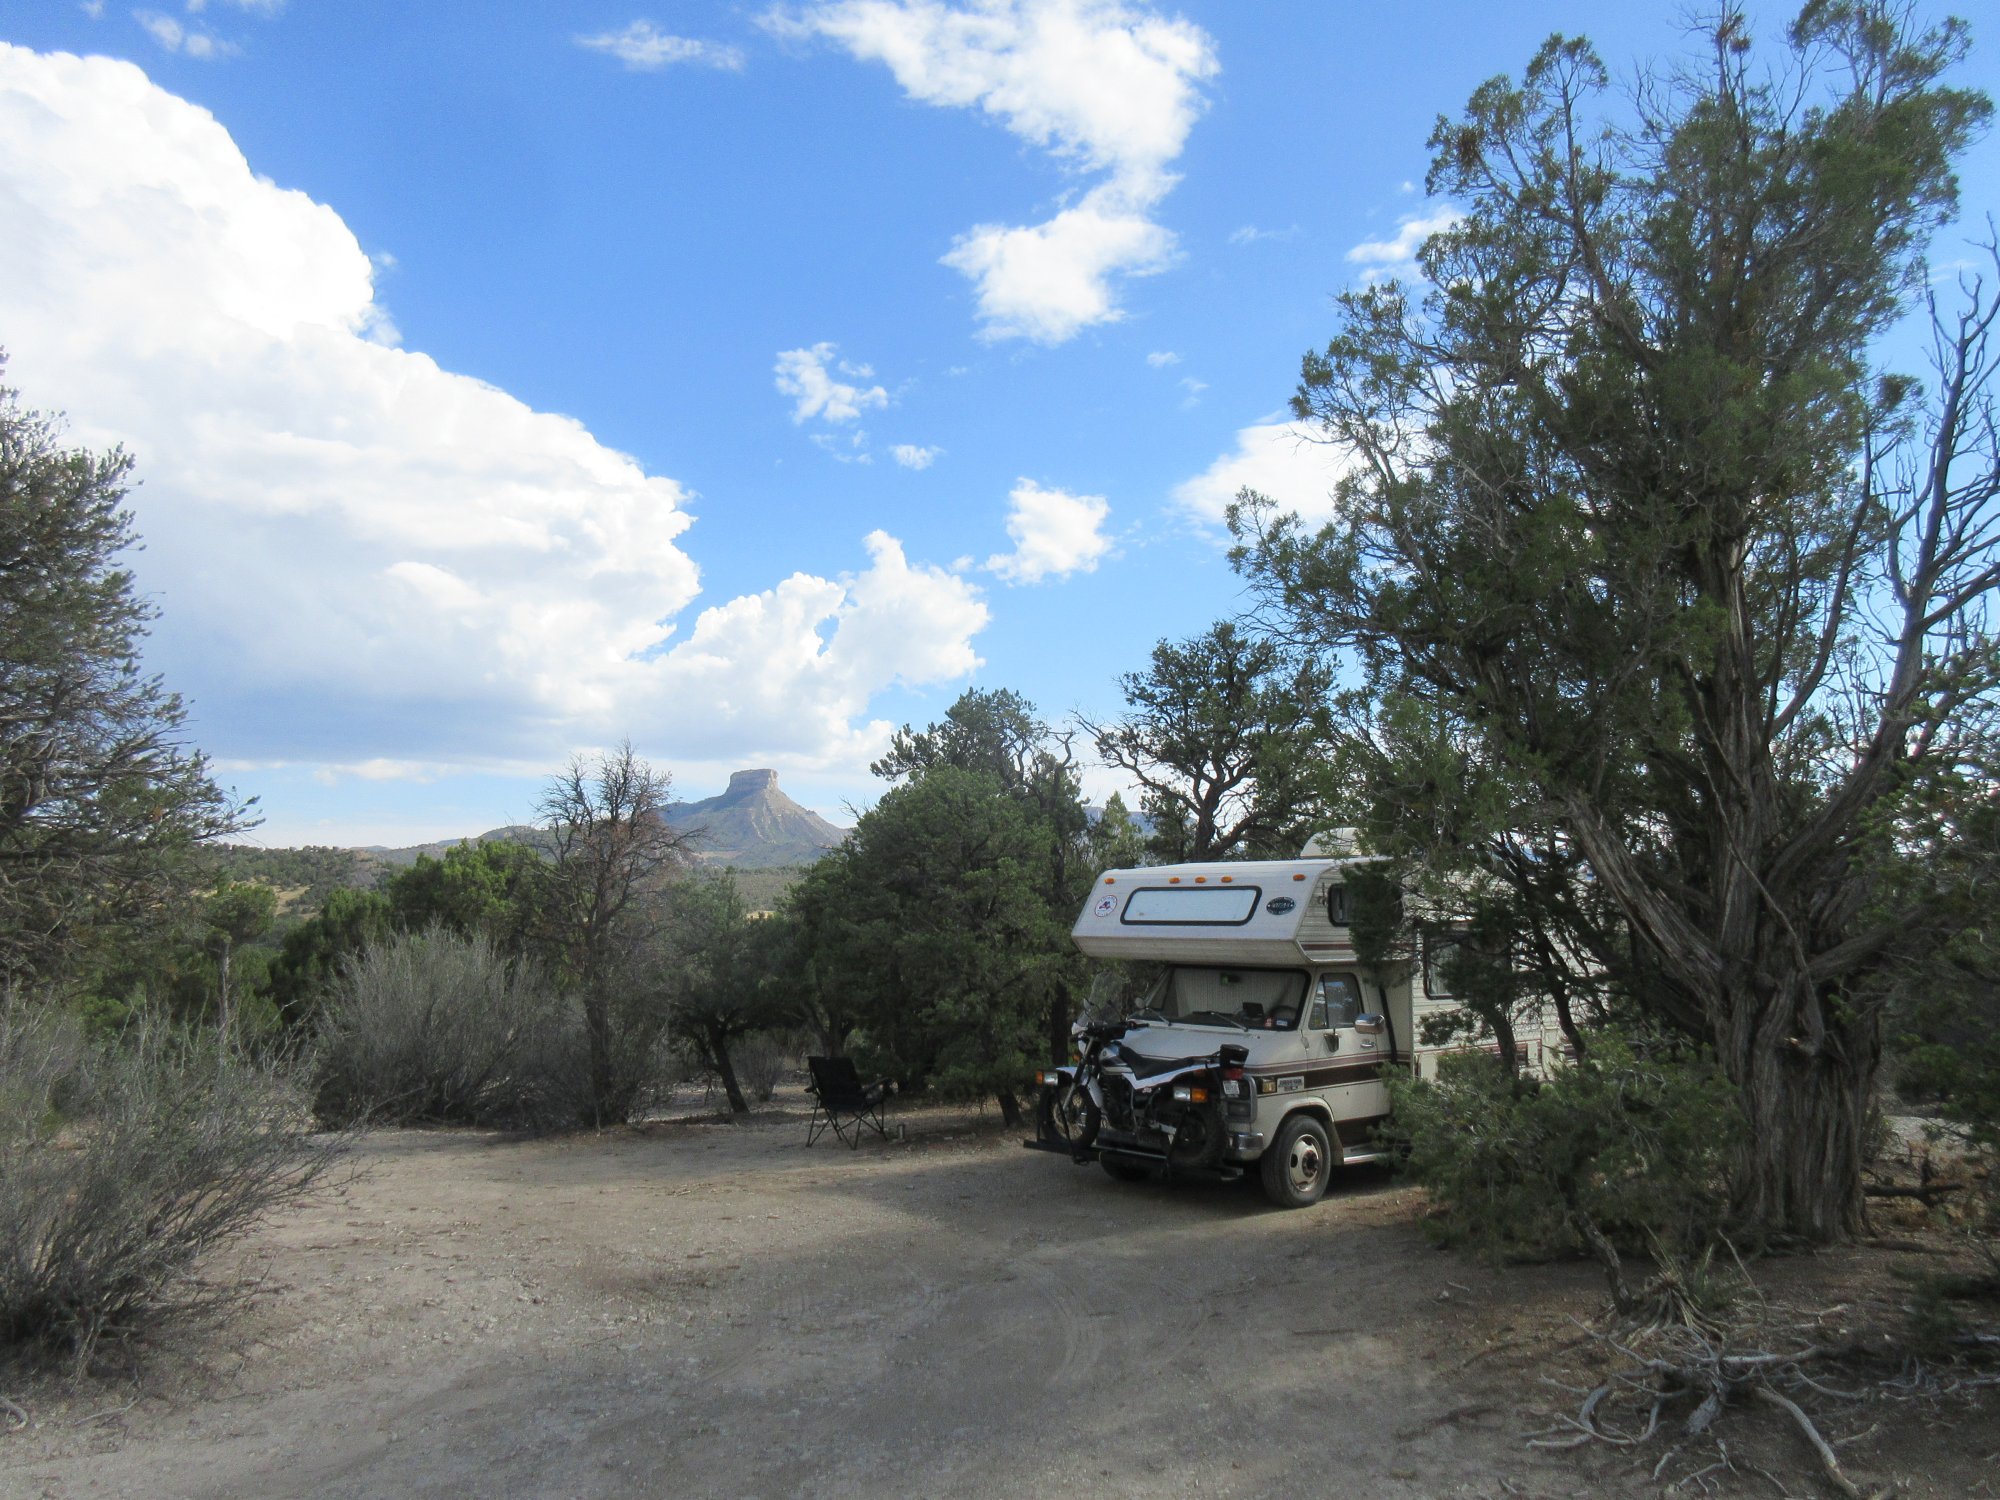 Protecting Our Public Lands: Escapees RV Club’s RVers Boondocking Policy 2